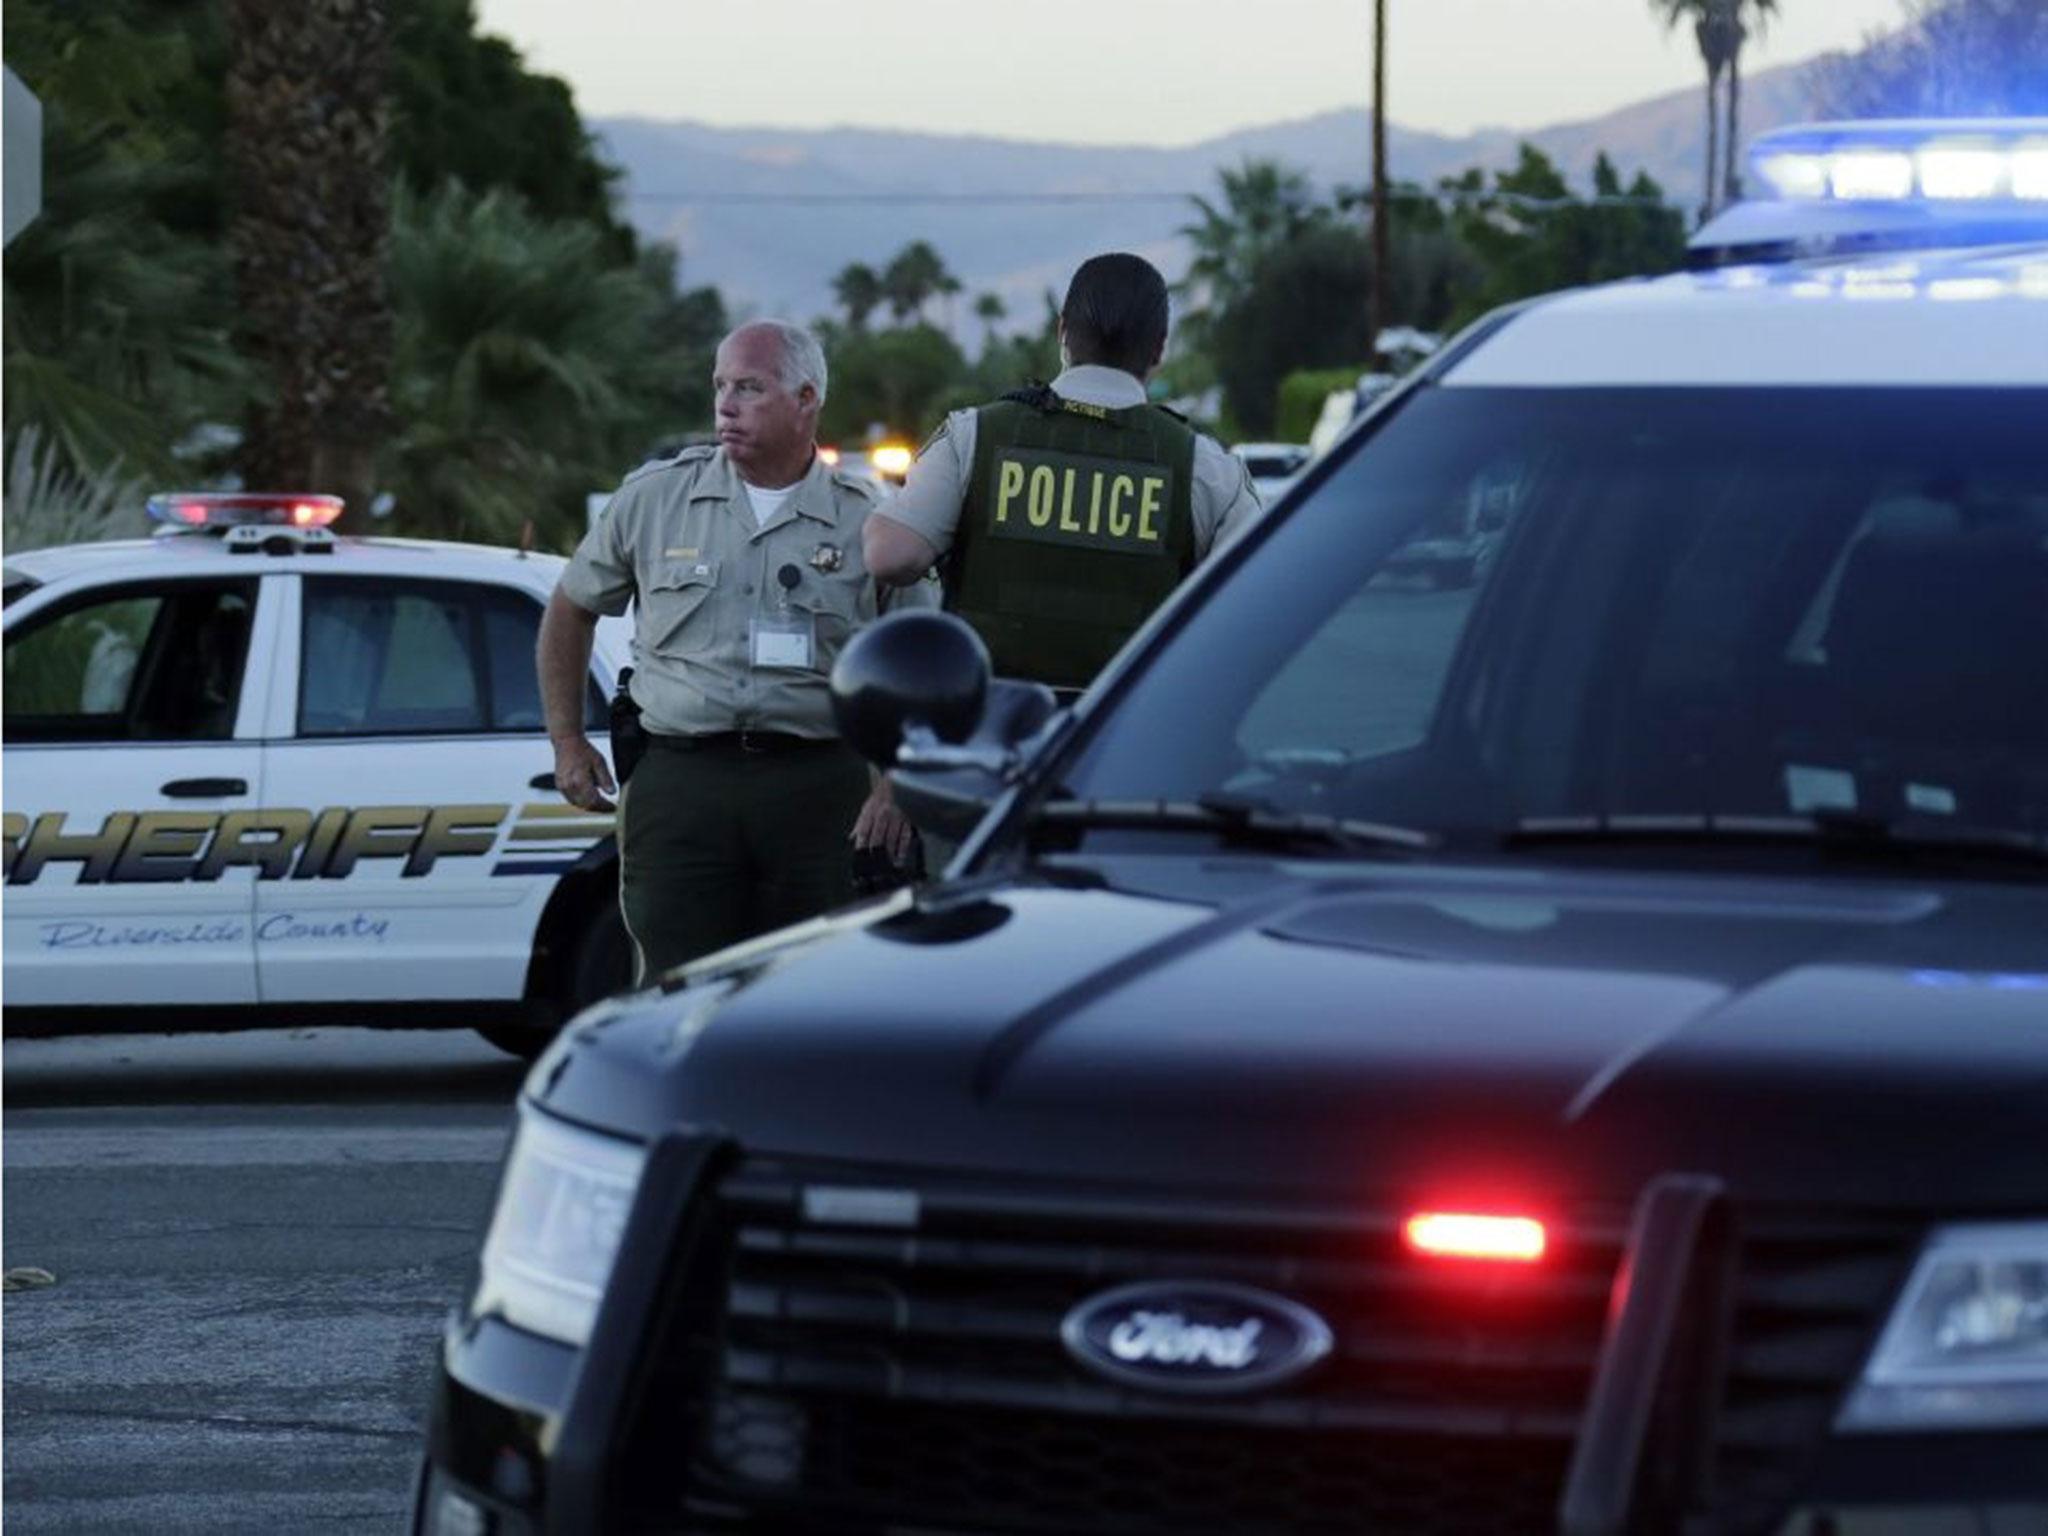 Law enforcement officers secure the perimeter near the location where two Palm Springs Police Department officers were killed and another wounded during a domestic disturbance call in Palm Springs, California, USA 08 October 2016